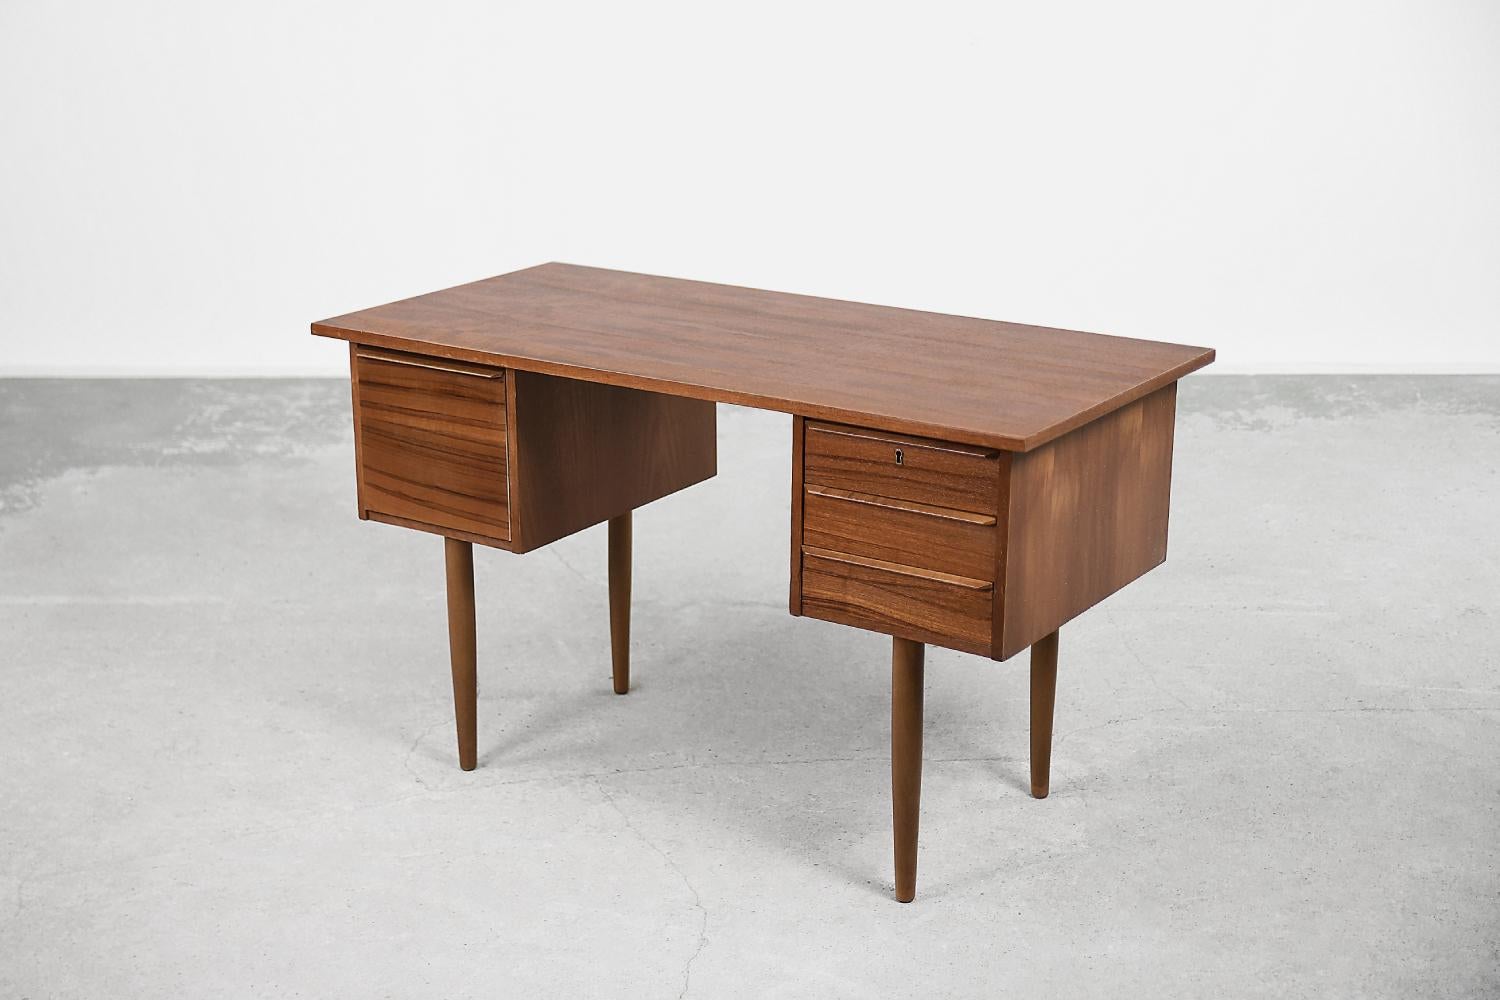 Classic Vintage Mid-Century Scandinavian Modern Teak Wood Desk with Drawers In Excellent Condition For Sale In Warszawa, Mazowieckie